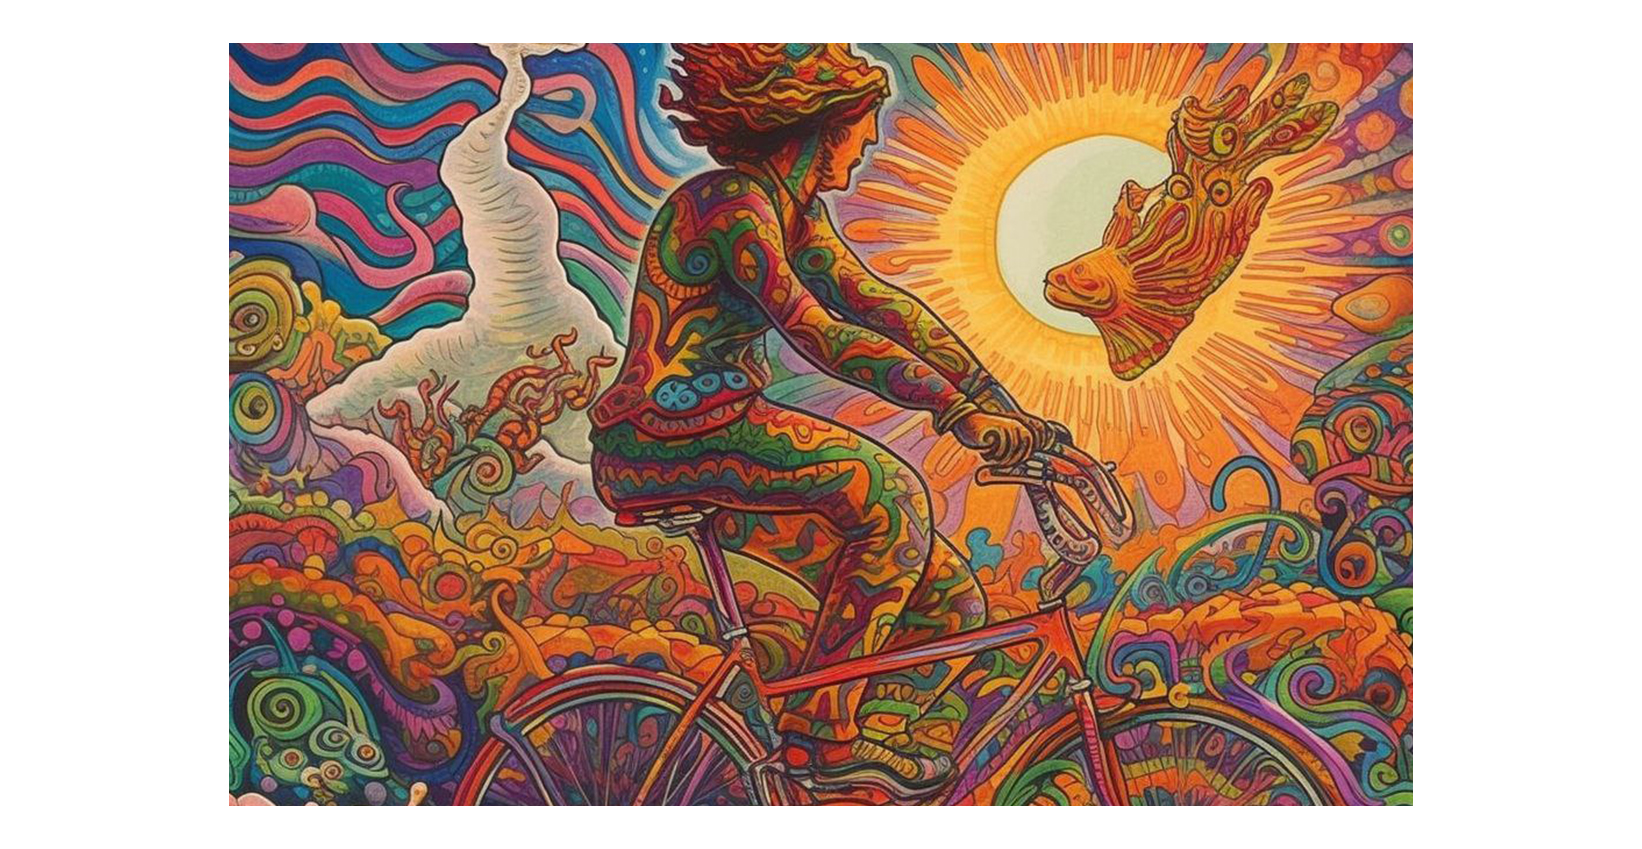 A surreal, trippy bicycle ride